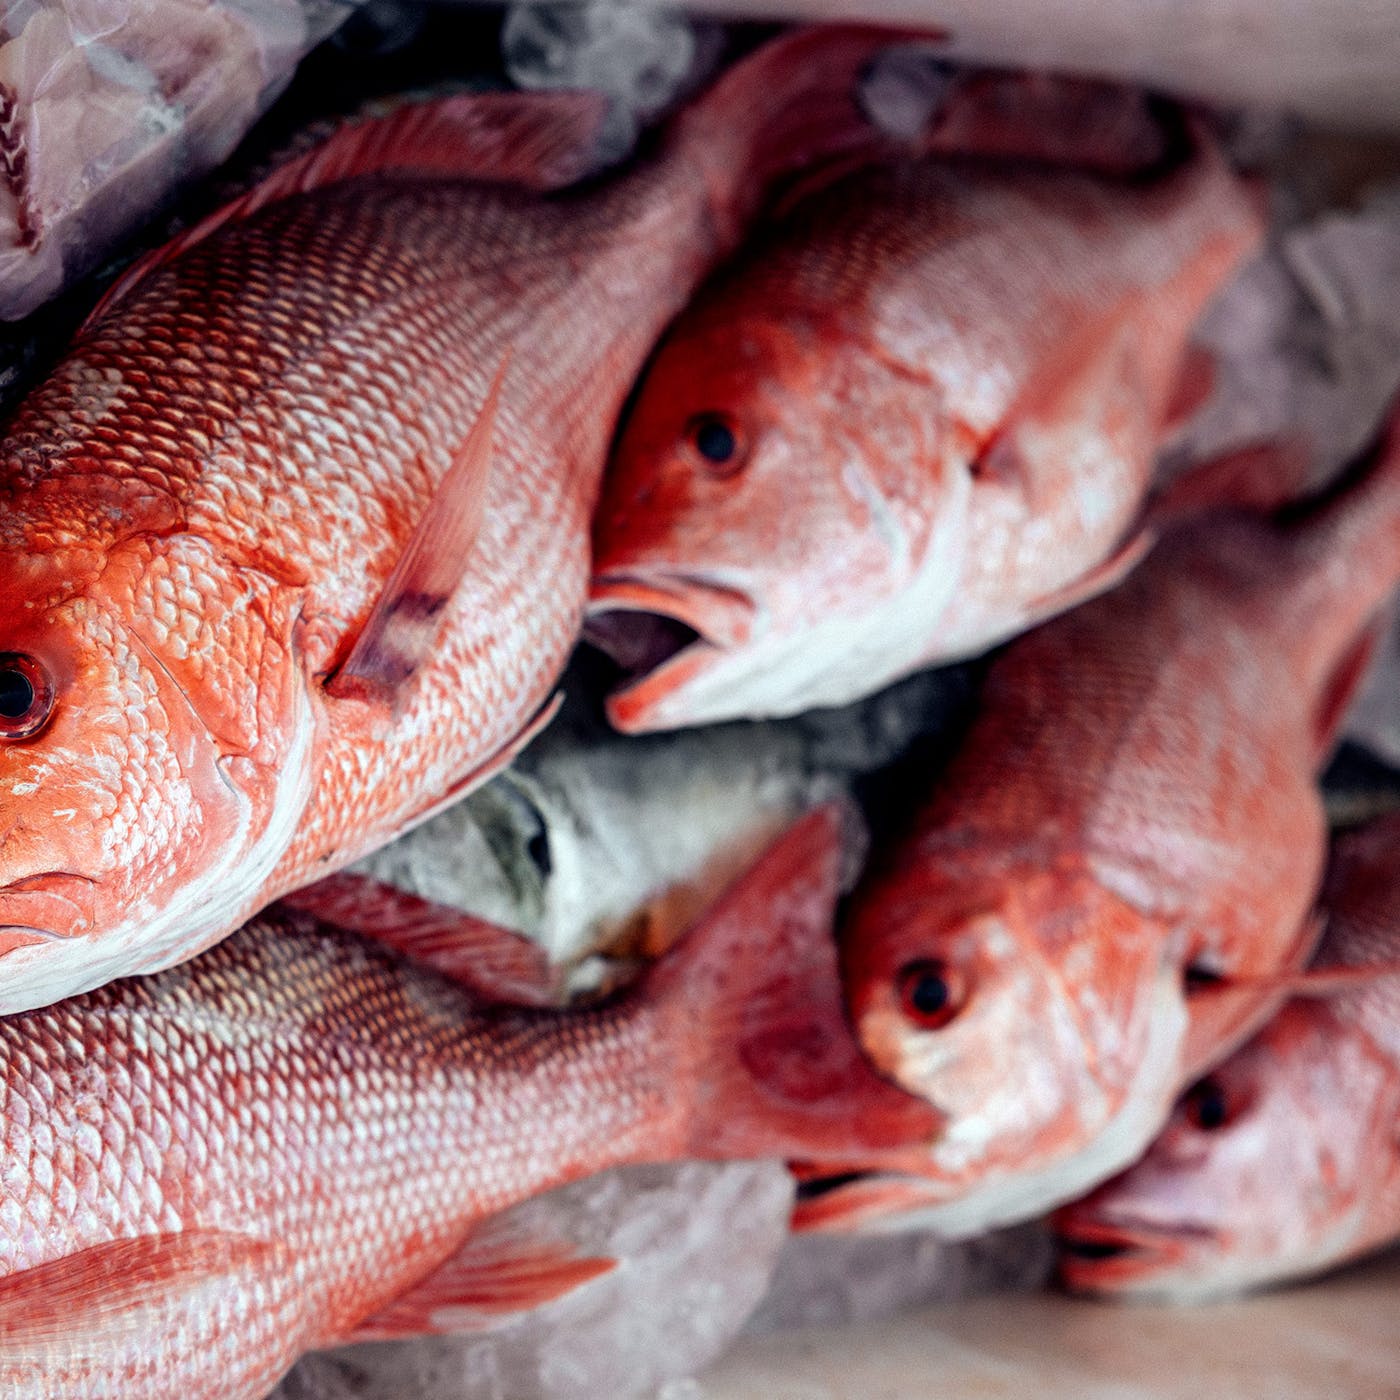 Wholesale Red Snapper Supplier London | Wigmore Trading